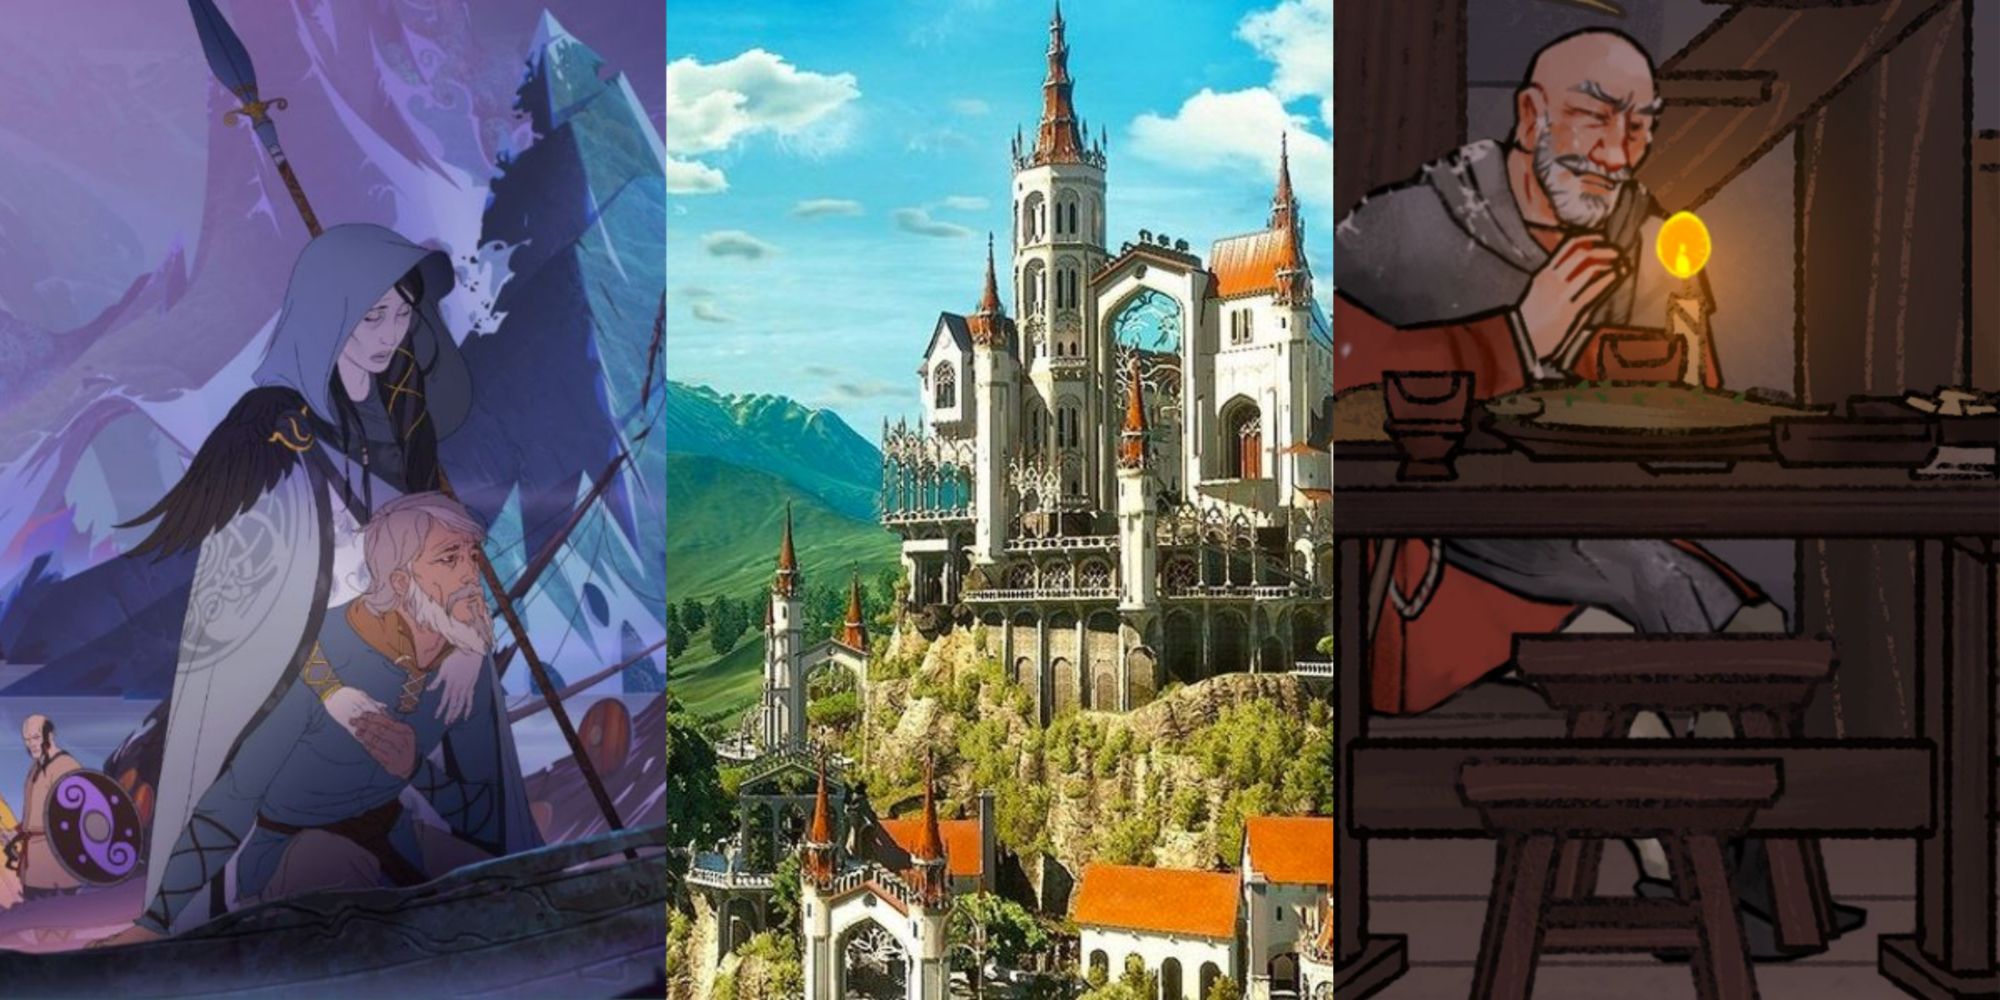 Cover art from The Banner Saga of a woman wearing a hood with a man crouched beneath her, the palace of Toussaint in The Witcher 3, and a character at a table in Pentiment, left to right